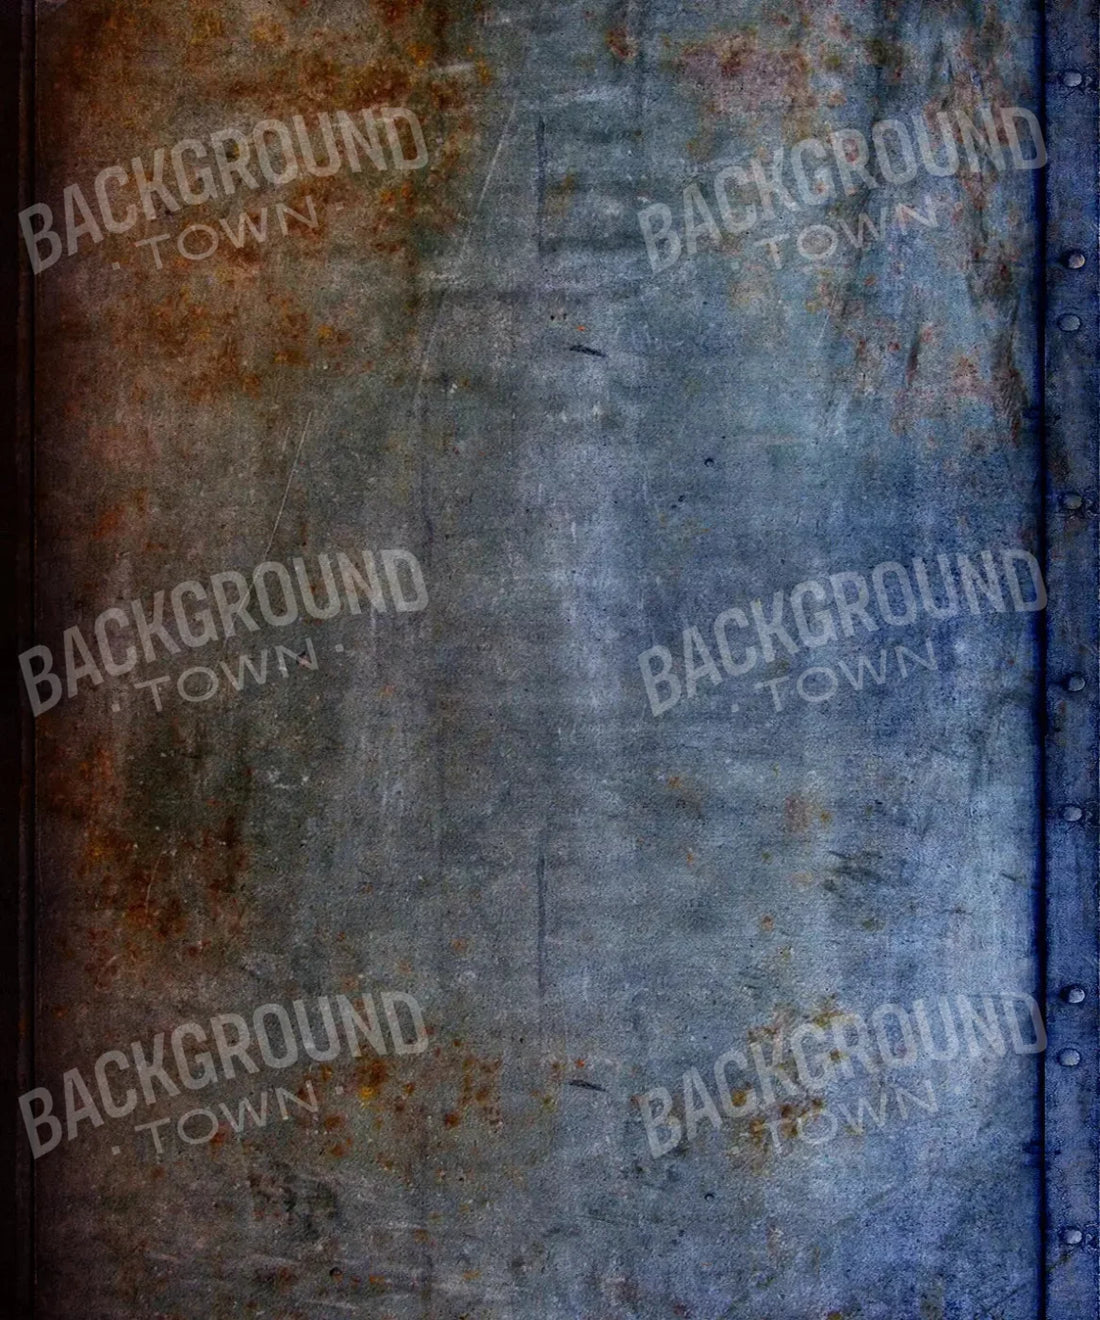 Blue Urban Grunge Backdrop for Photography